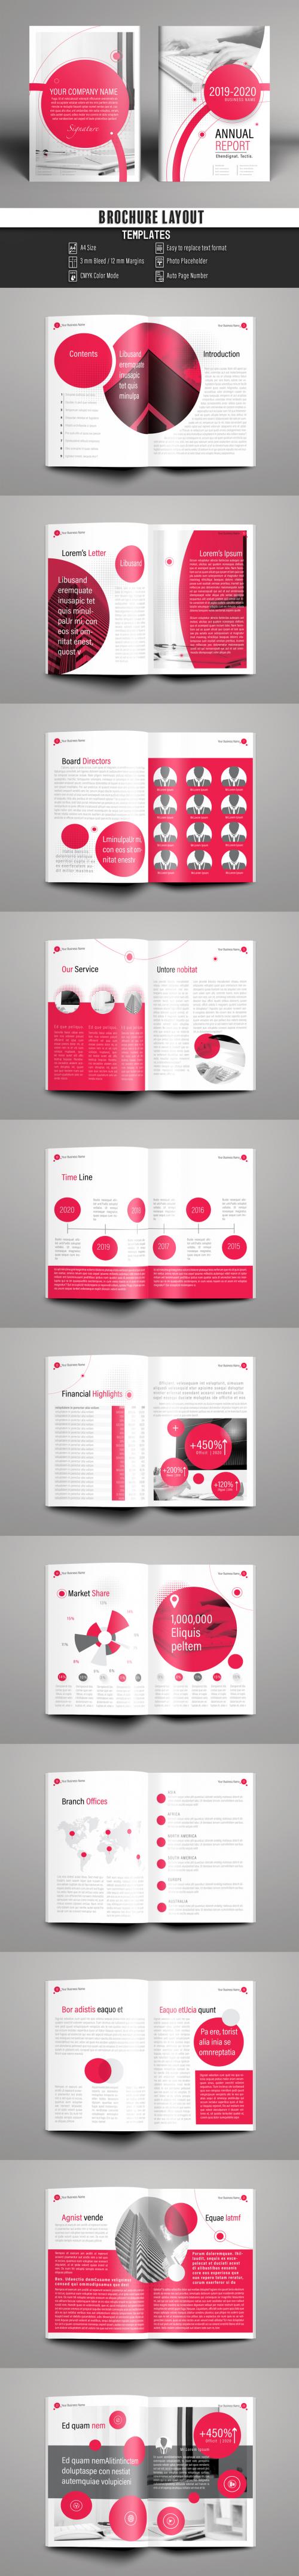 Adobe Stock - Red and White Annual Report Layout 1 - 191069956